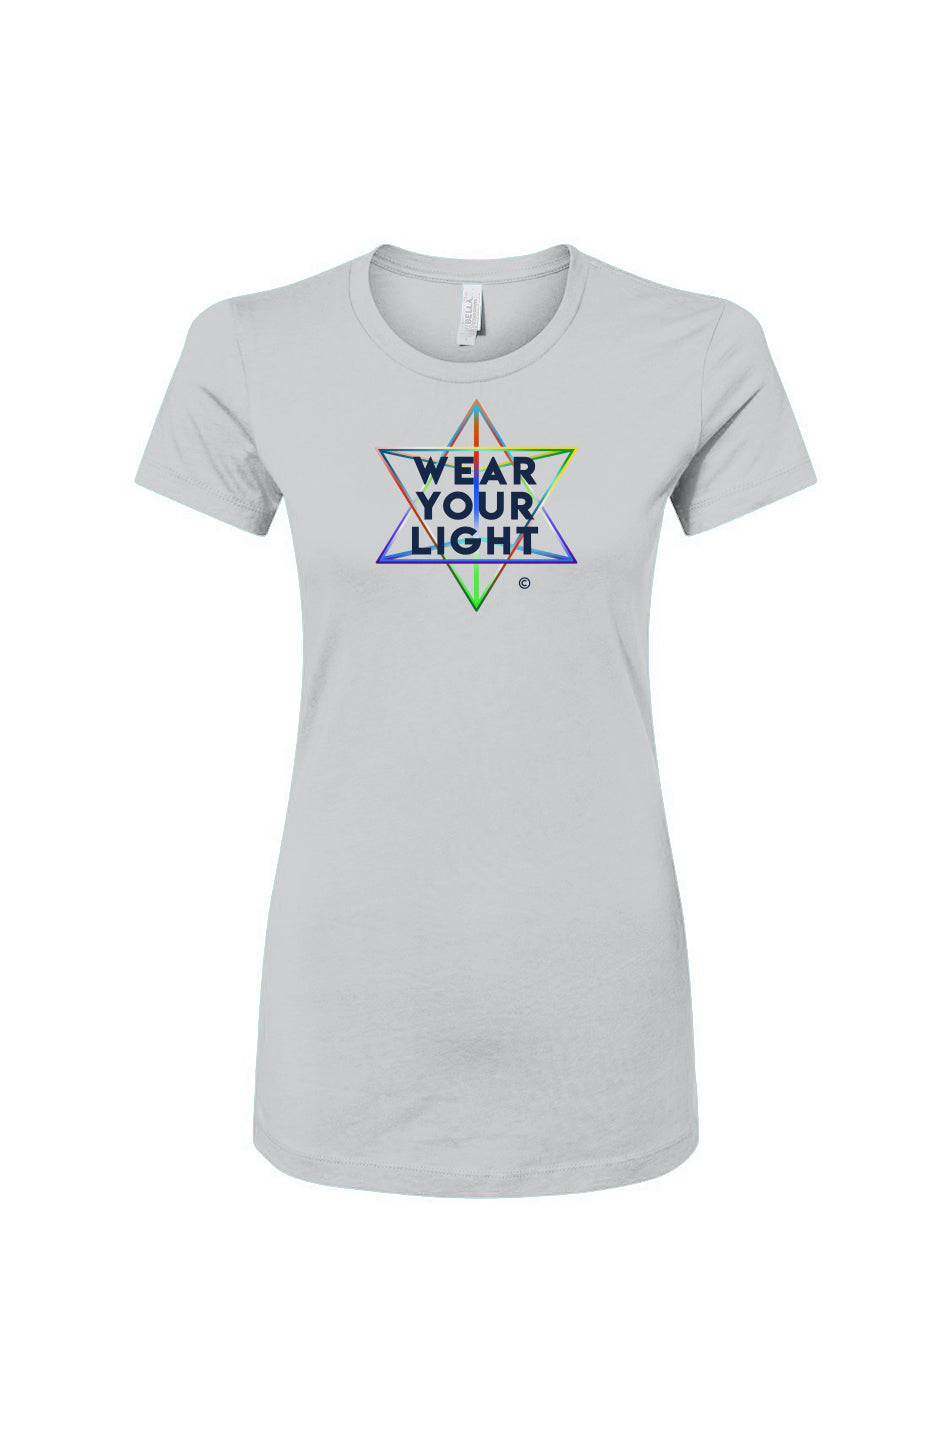 the wyl collection: women's t-shirt